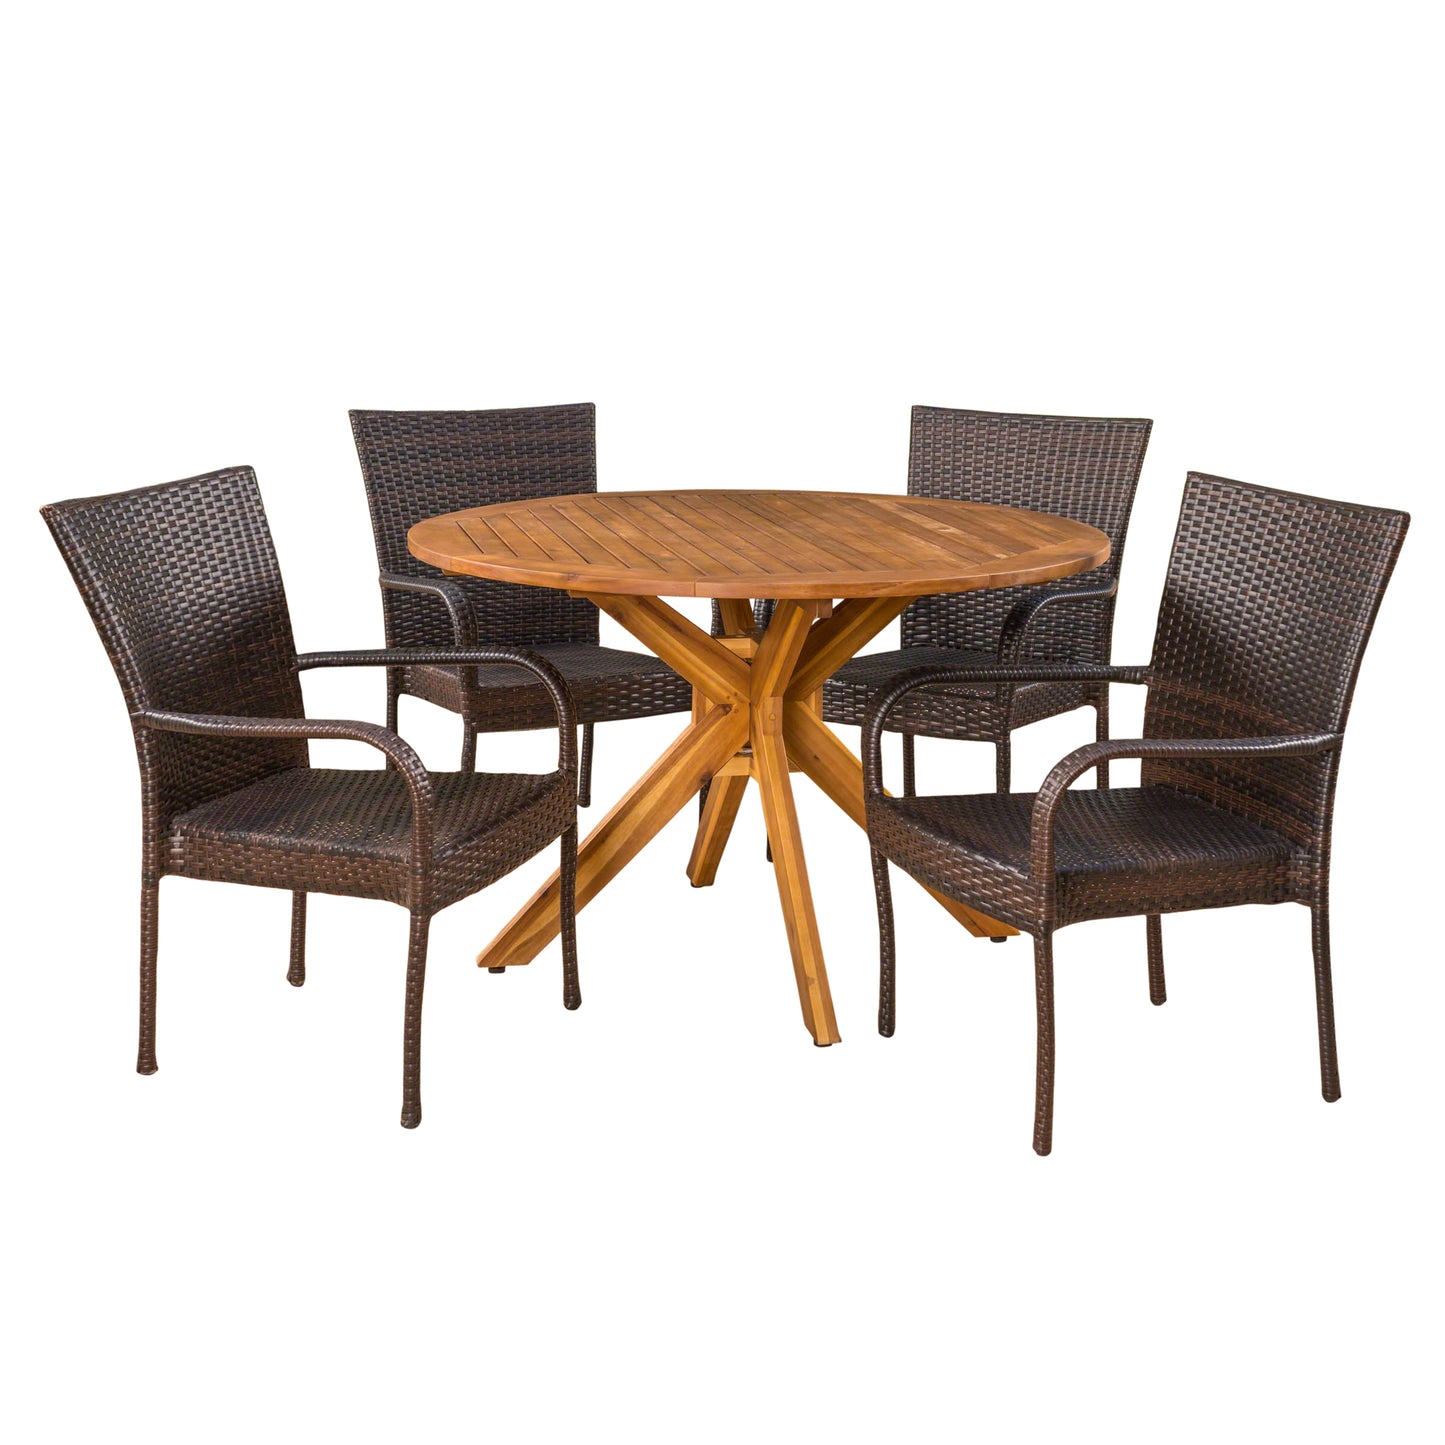 Avant Outdoor 5 Piece Multibrown Wicker Dining Set with Teak Finish Circular Acacia Wood Dining Table